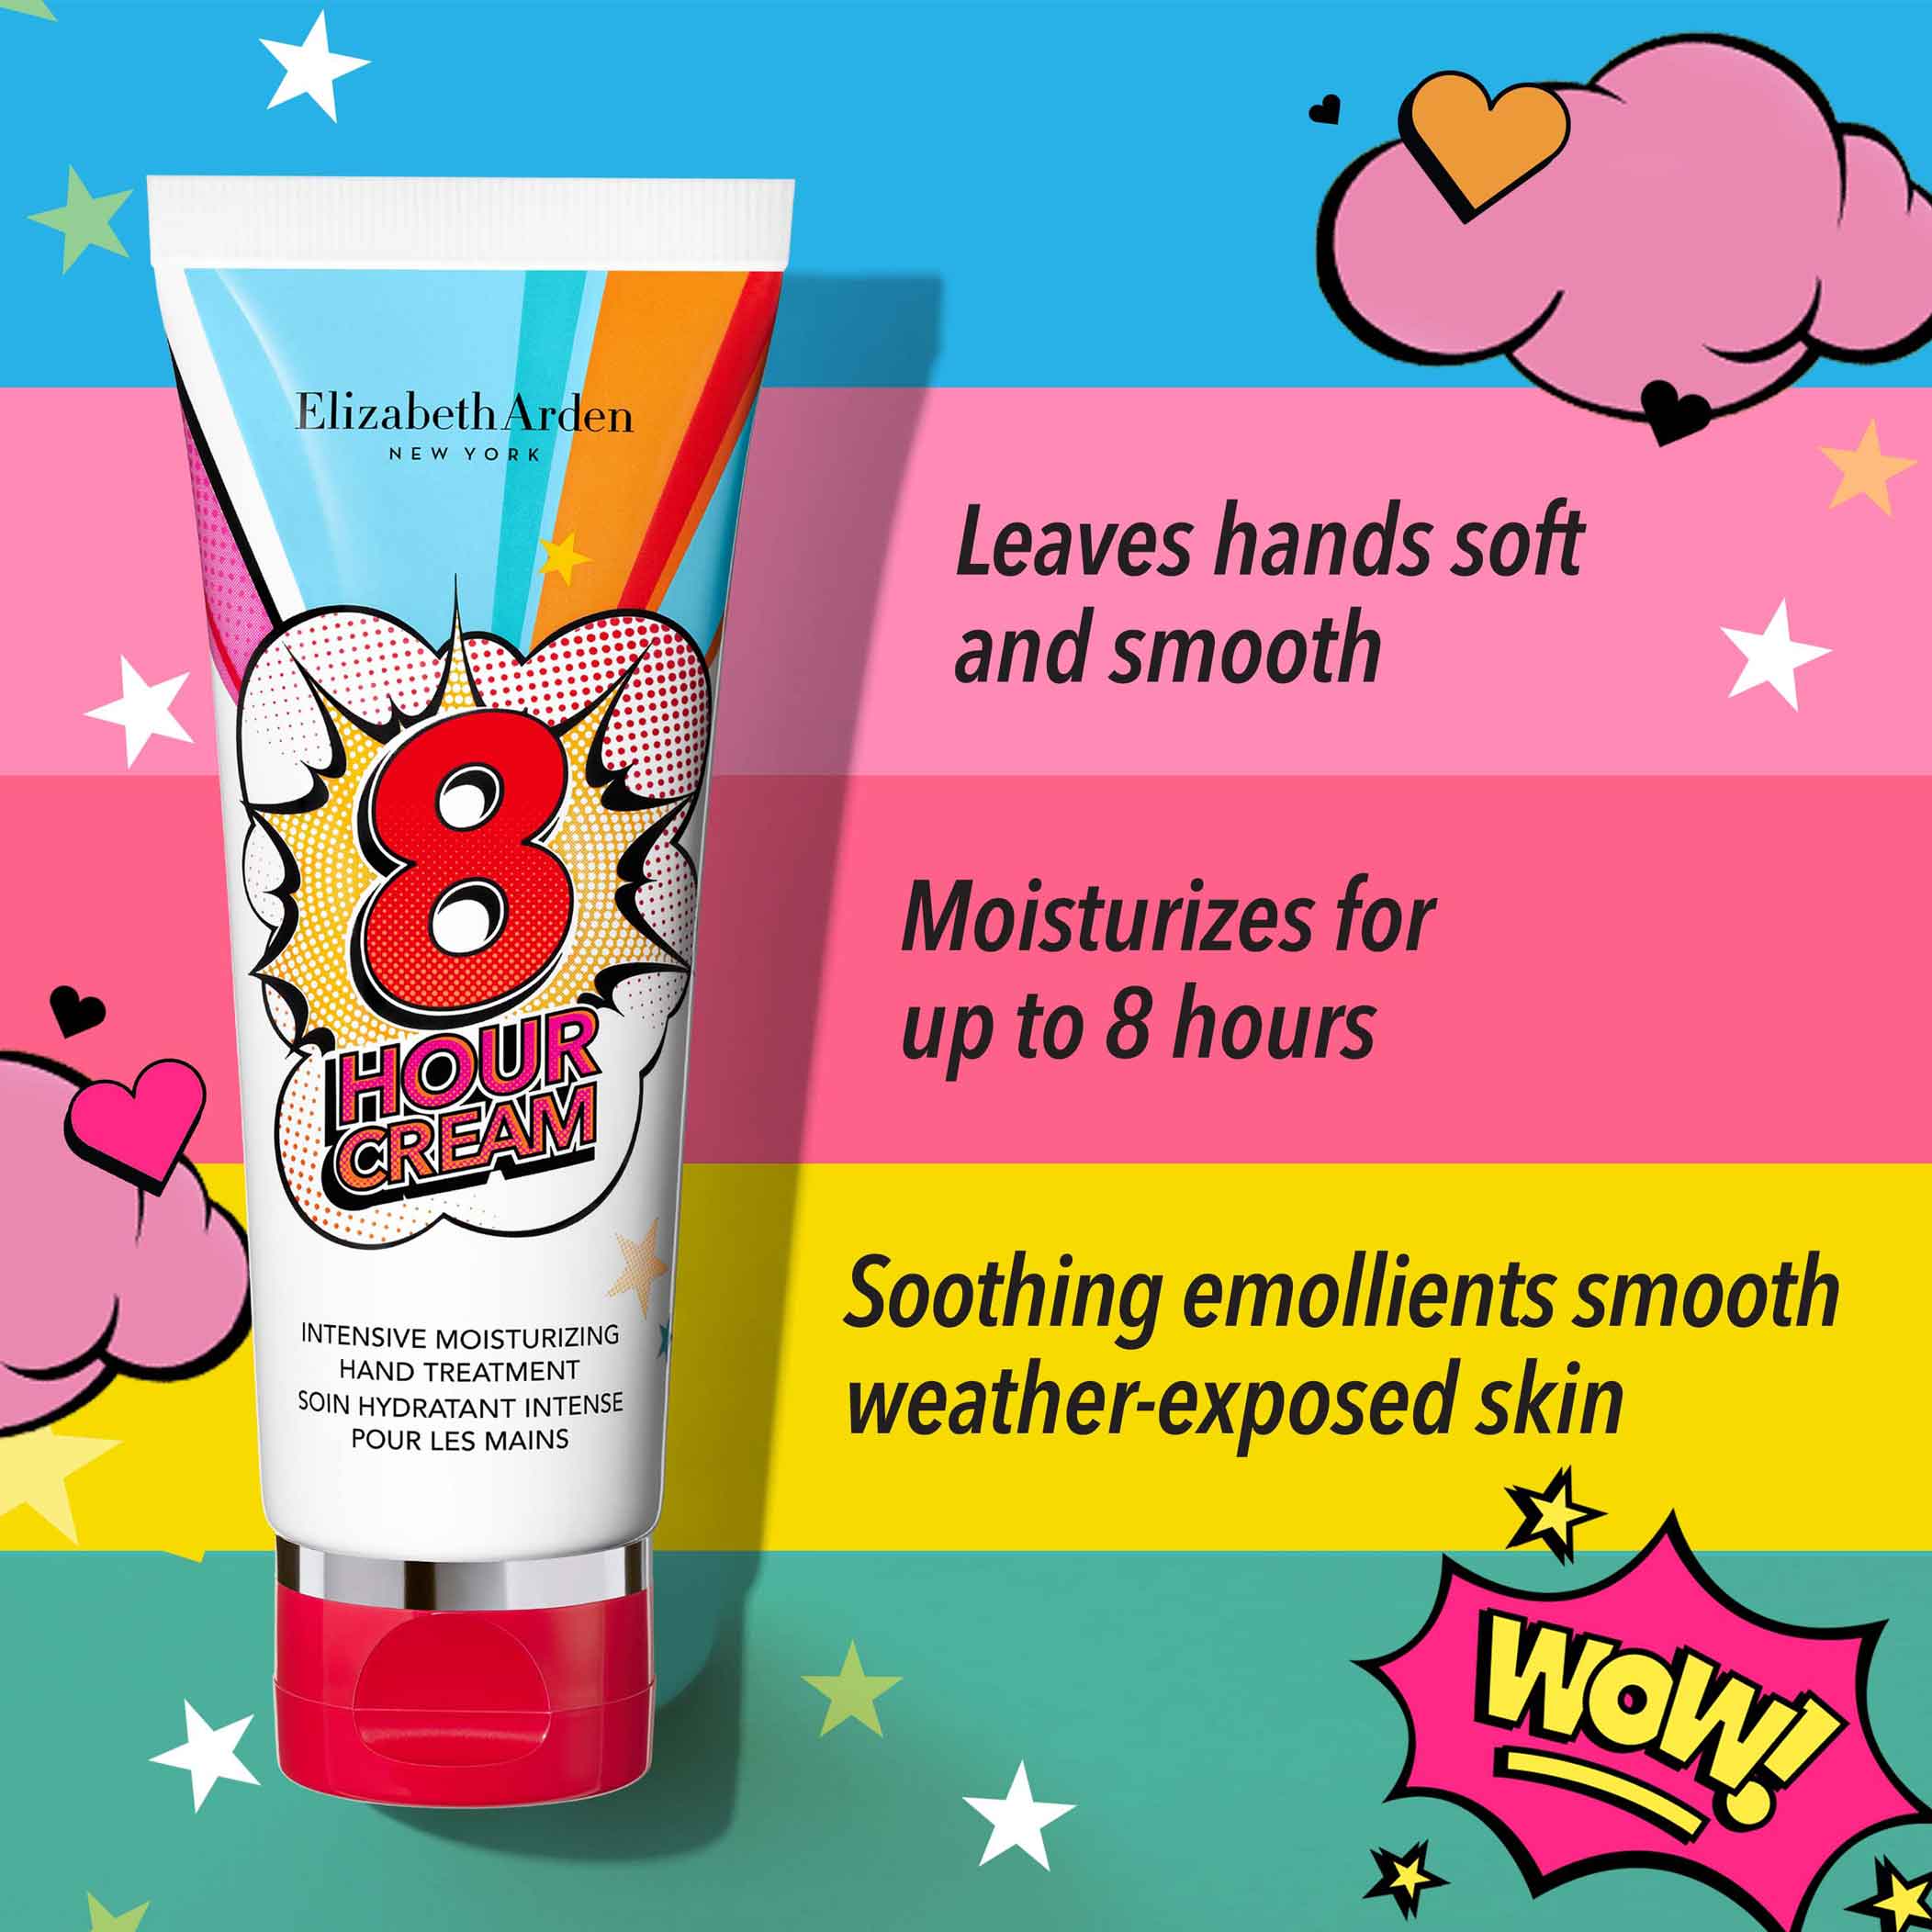 Leaves hands soft and smooth, moisturizes for up to 8 hours